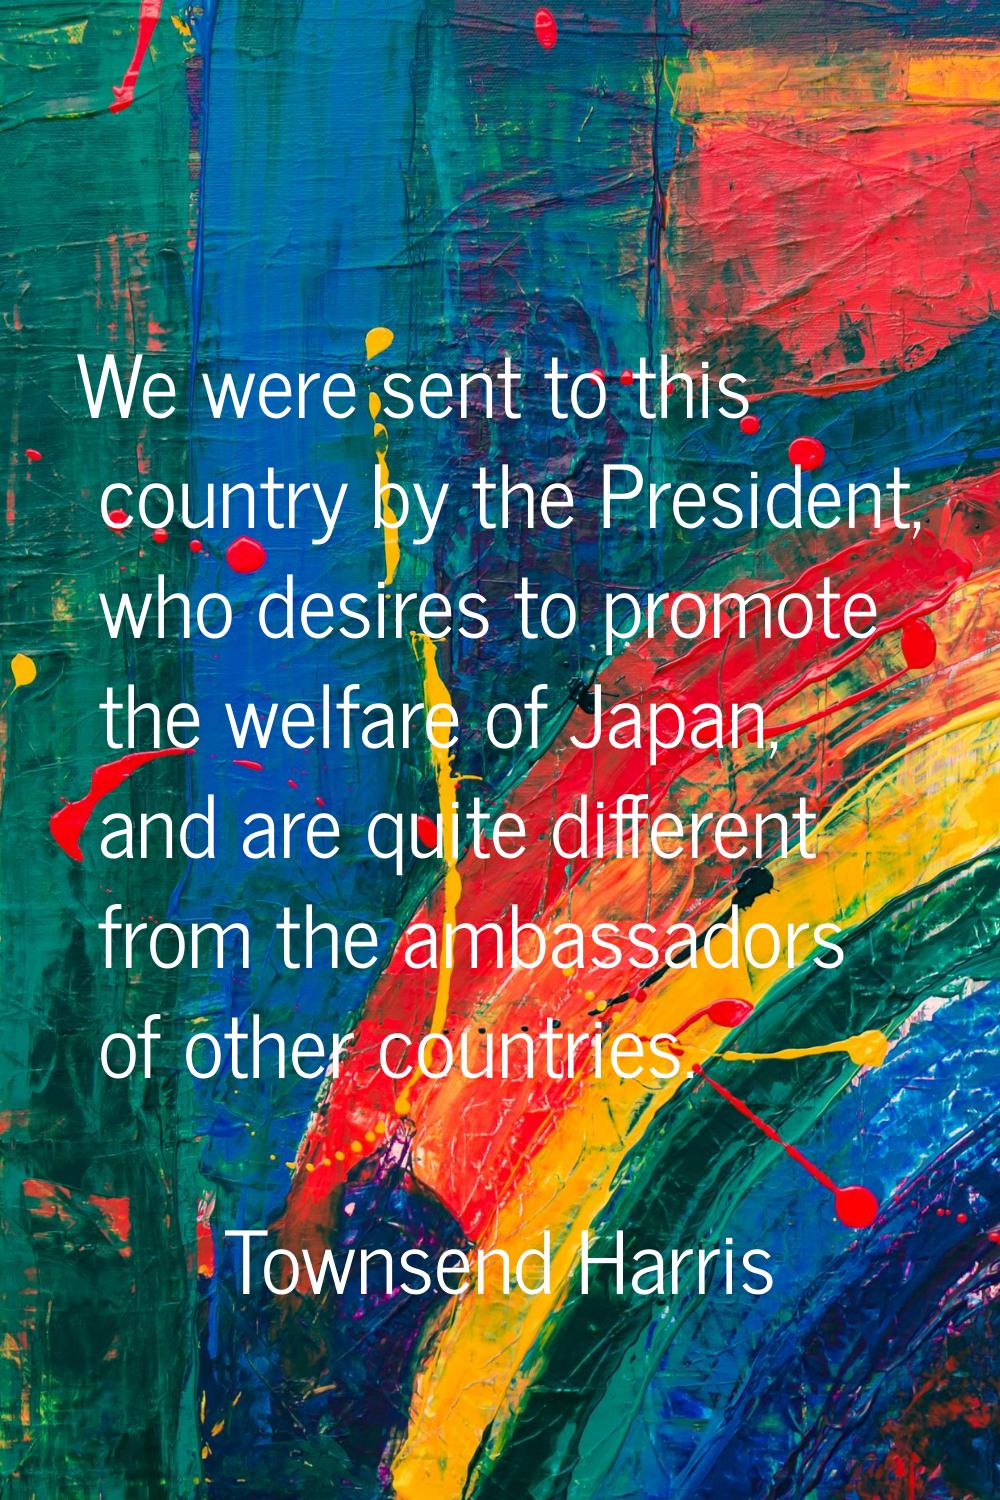 We were sent to this country by the President, who desires to promote the welfare of Japan, and are